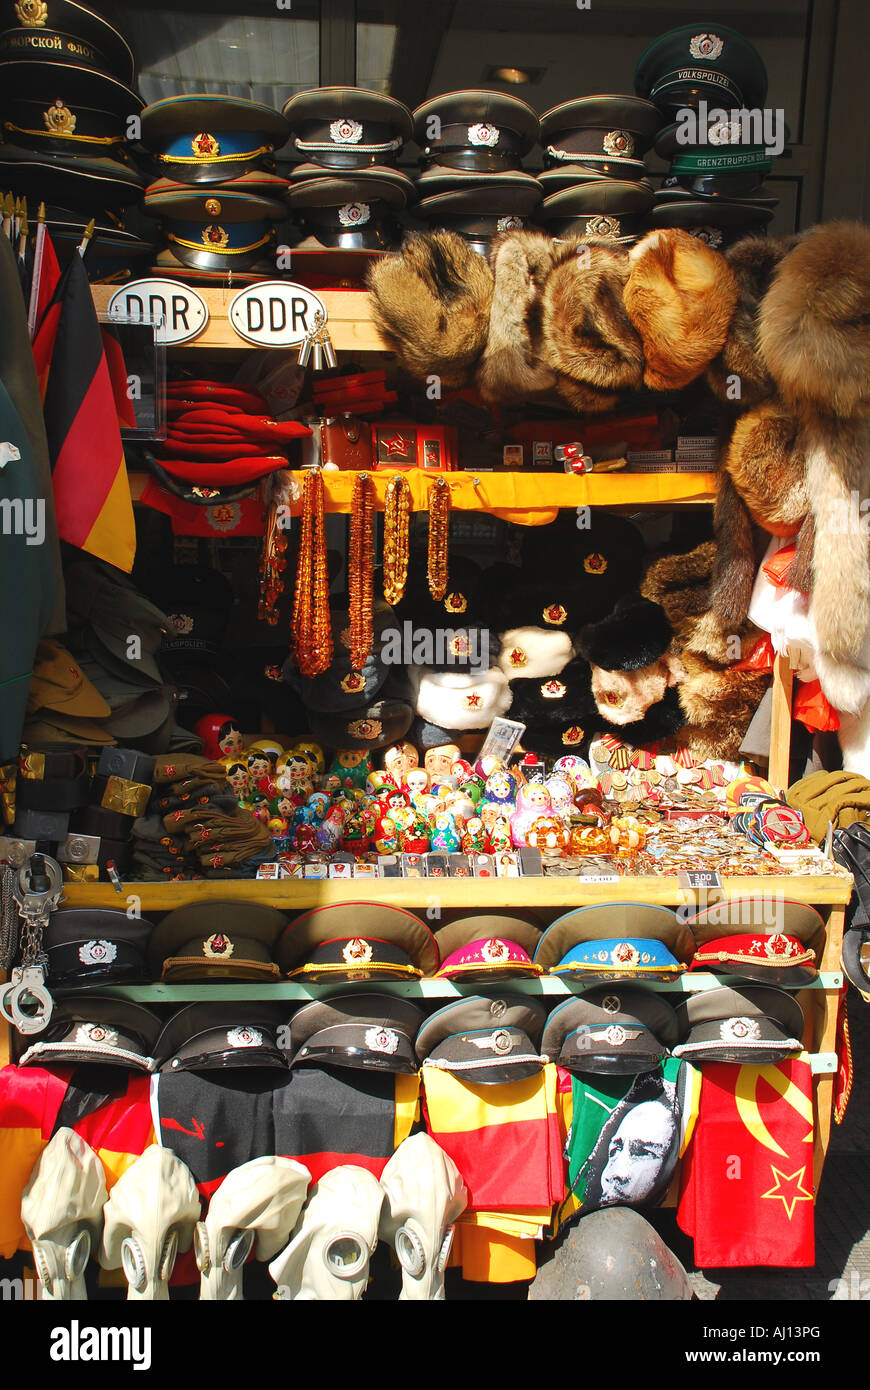 Ddr Souvenirs High Resolution and Images -